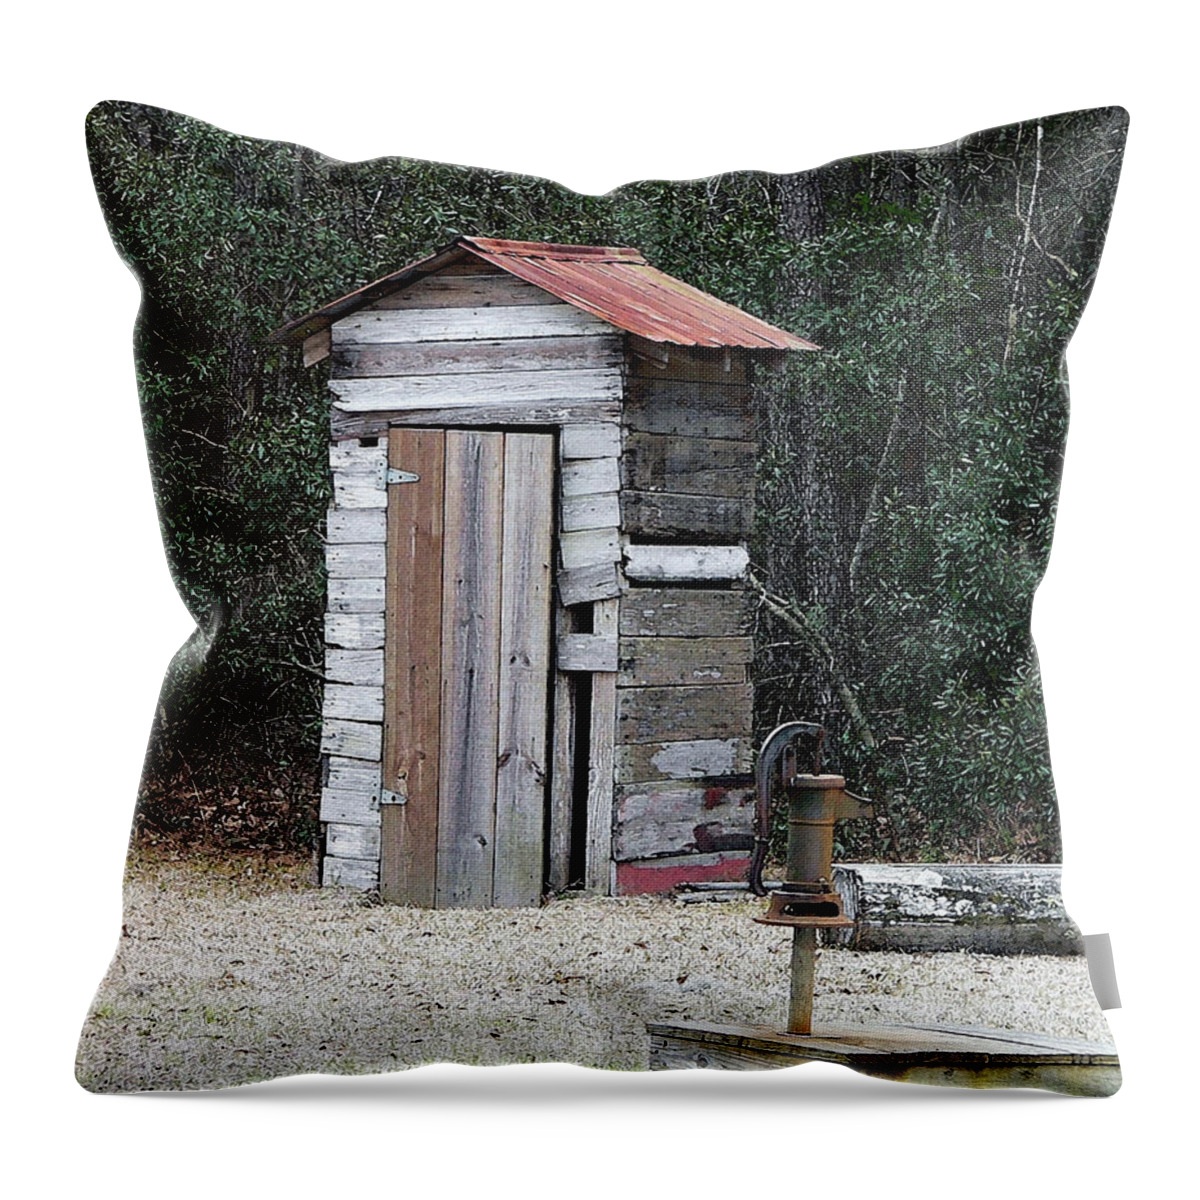 Outhouse Throw Pillow featuring the photograph Oldtime Outhouse - Digital Art by Al Powell Photography USA